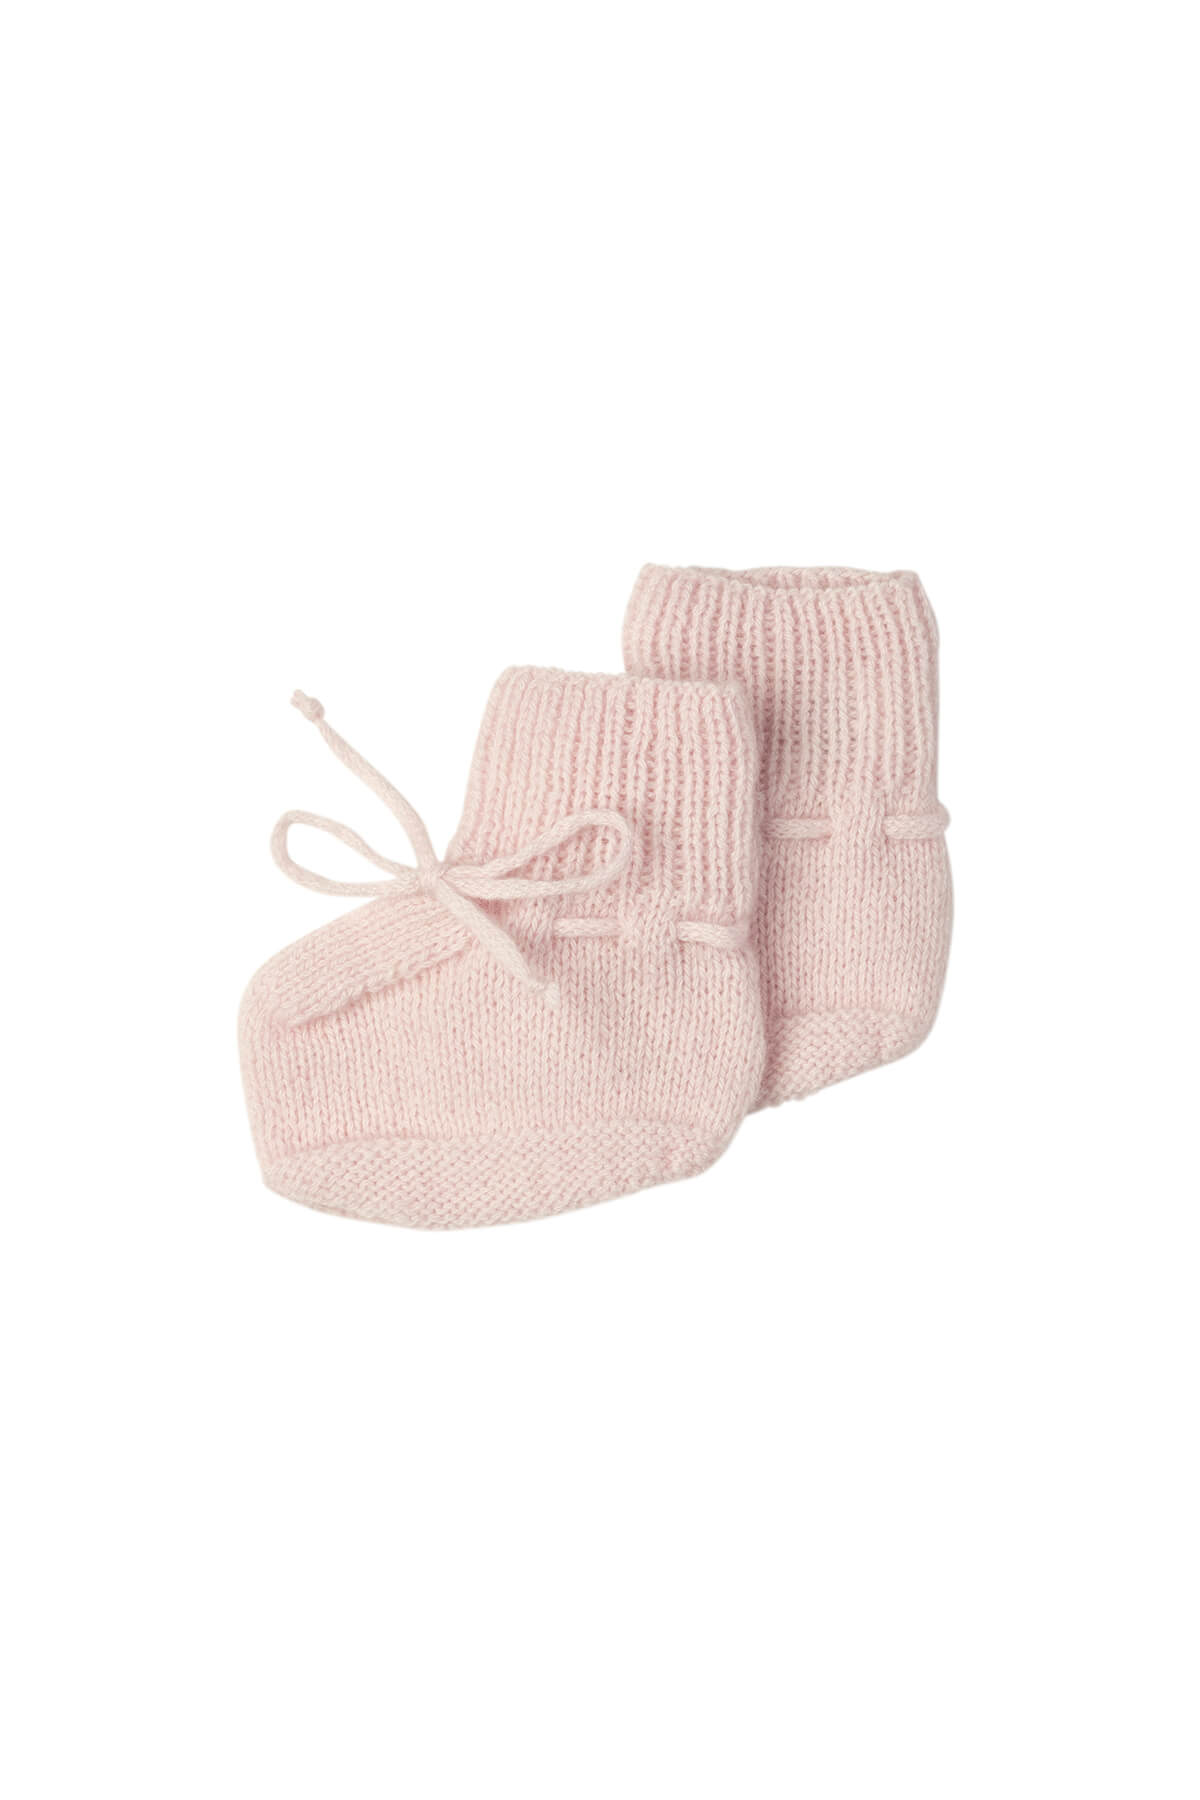 Johnstons of Elgin’s Baby's 1st Cashmere Accessories Gift Set with Blush Pink Cashmere Baby Booties on a white background AW21GIFTSET20B